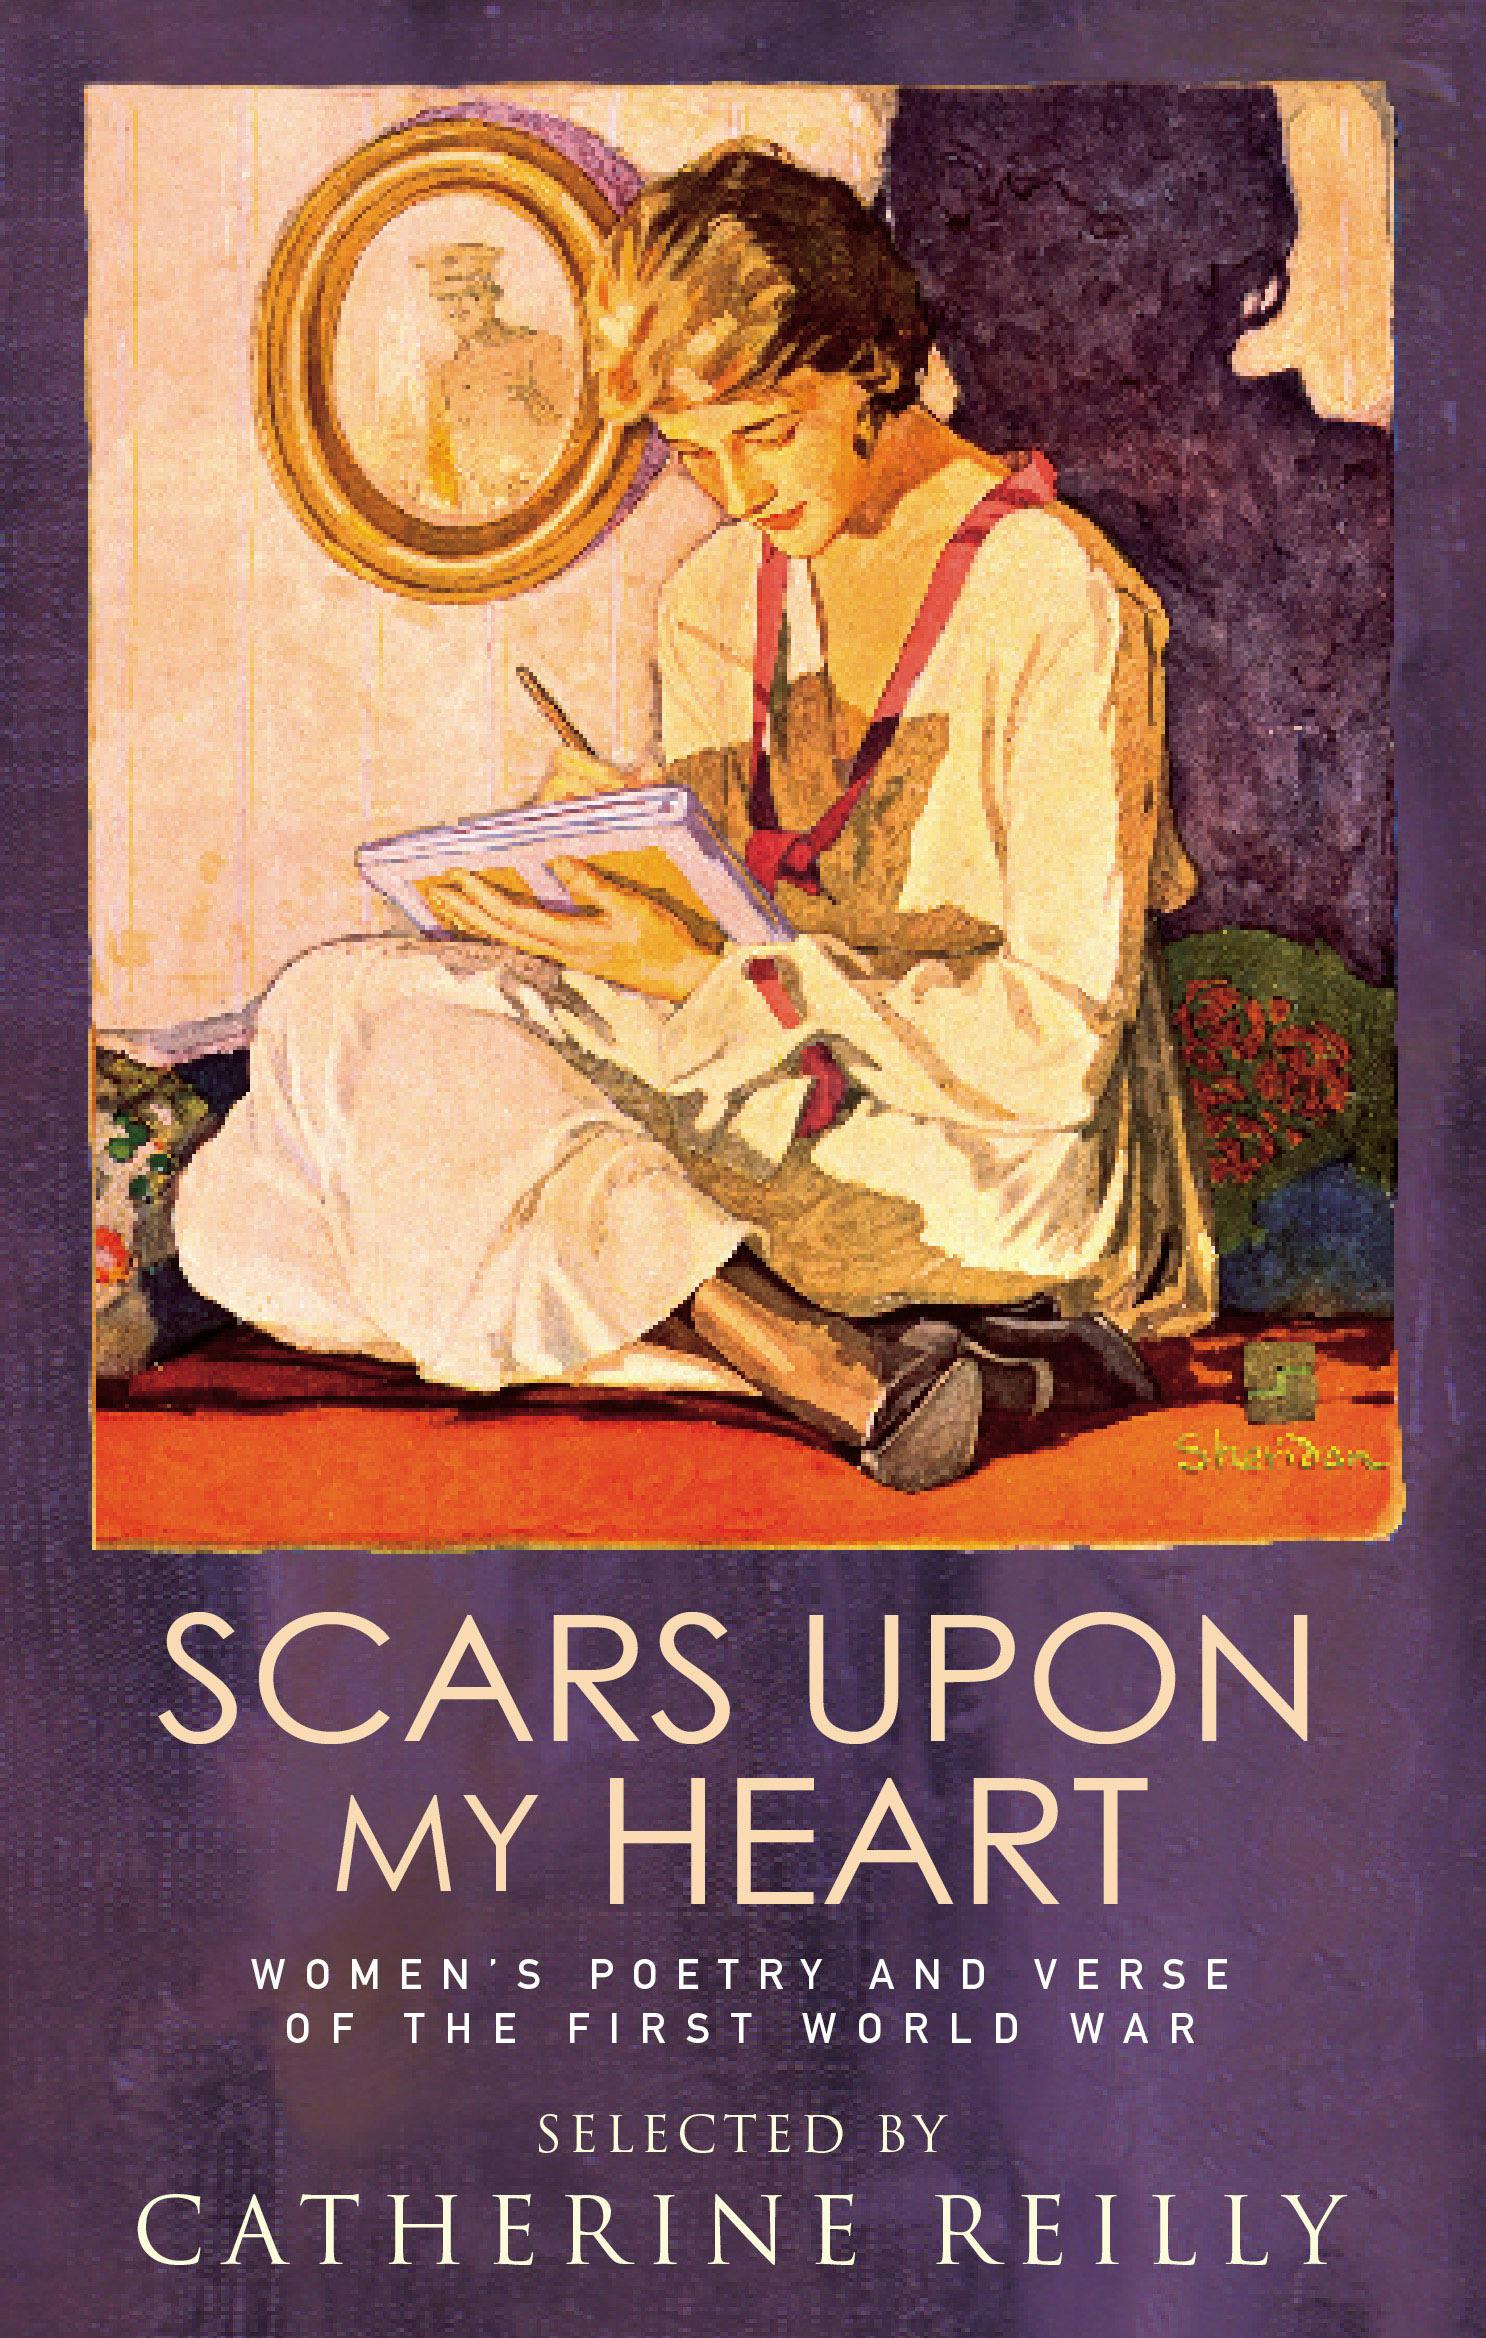 Scars Upon My Heart Women's Poetry and Verse of the First World War by Catherine Reilly Books